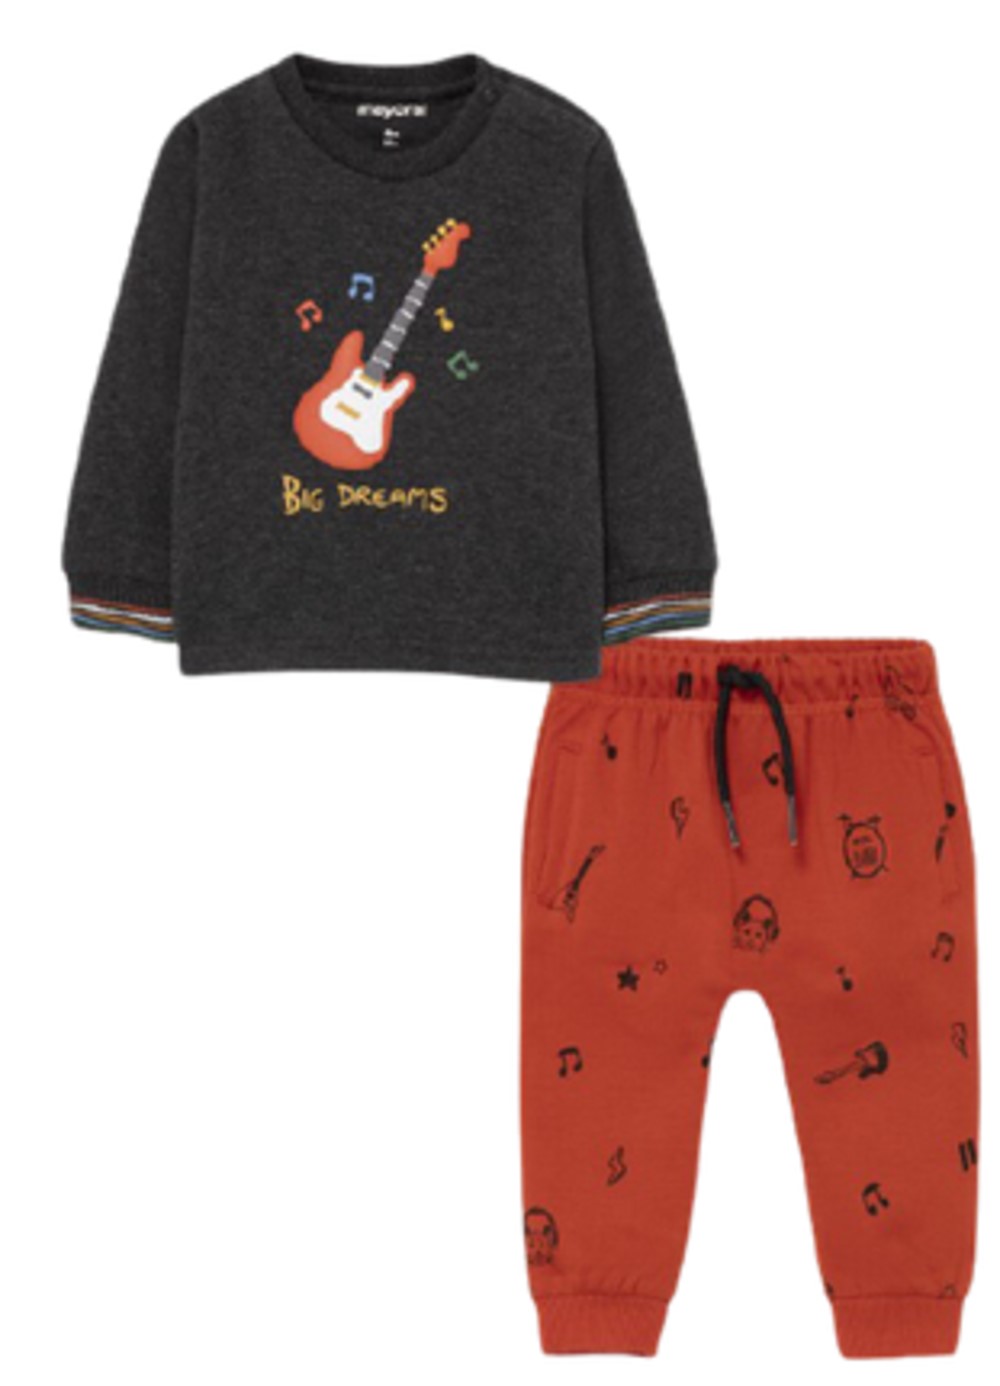 MAYORAL 2610 BABY BOYS FALL OUTFIT PANTS AND TOP SET (GUITAR DREAMS)